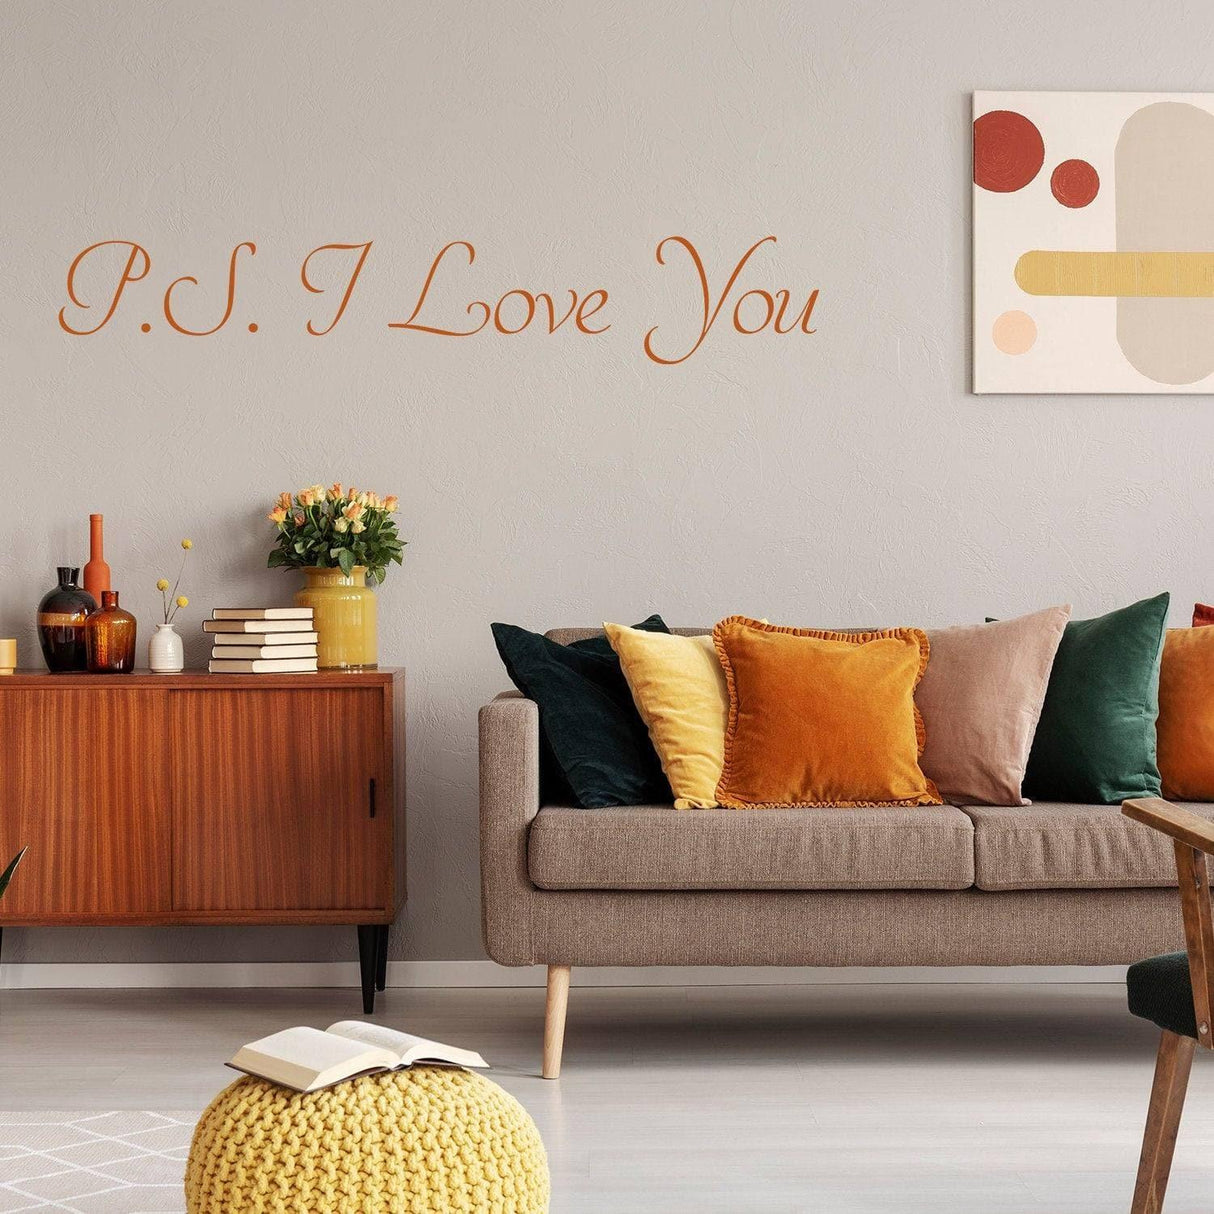 Ps I Love You Wall Sticker - Romantic Bedroom Quote Decor Art Vinyl Decal - More Sign Quotes Letter Home Romance Qoute Removable Stickers - Decords